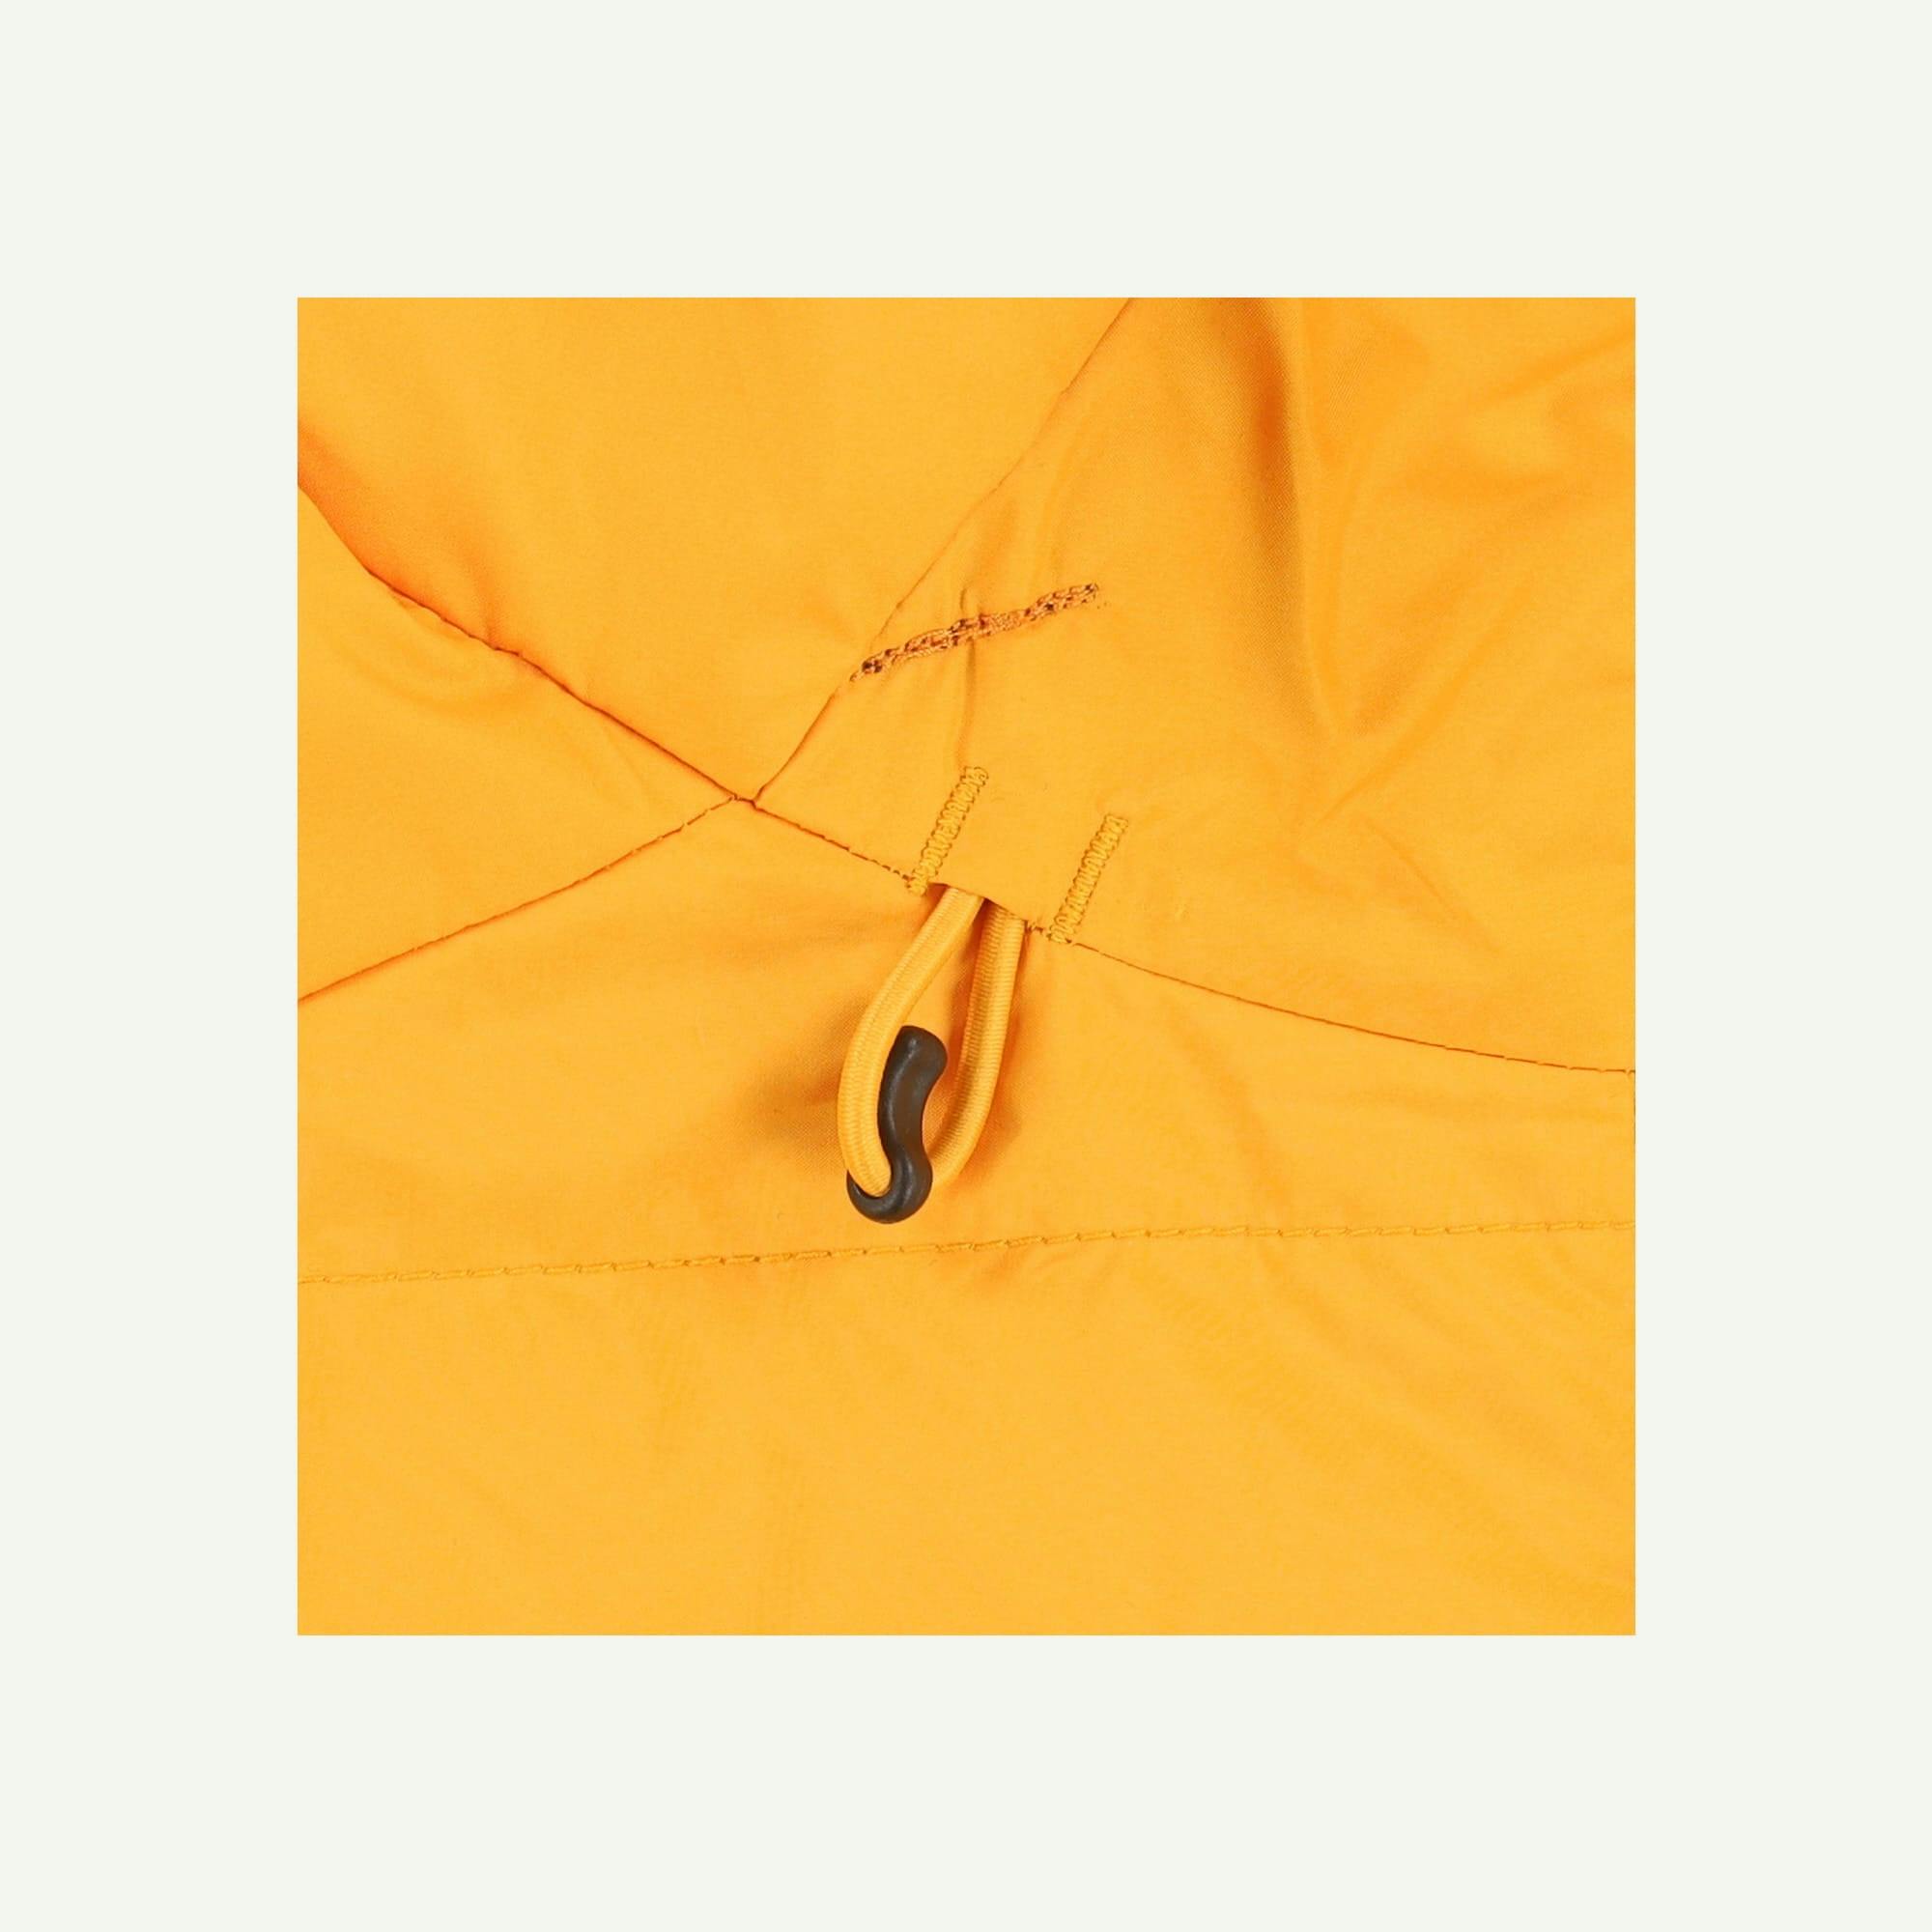 Finisterre Repaired Yellow Jacket